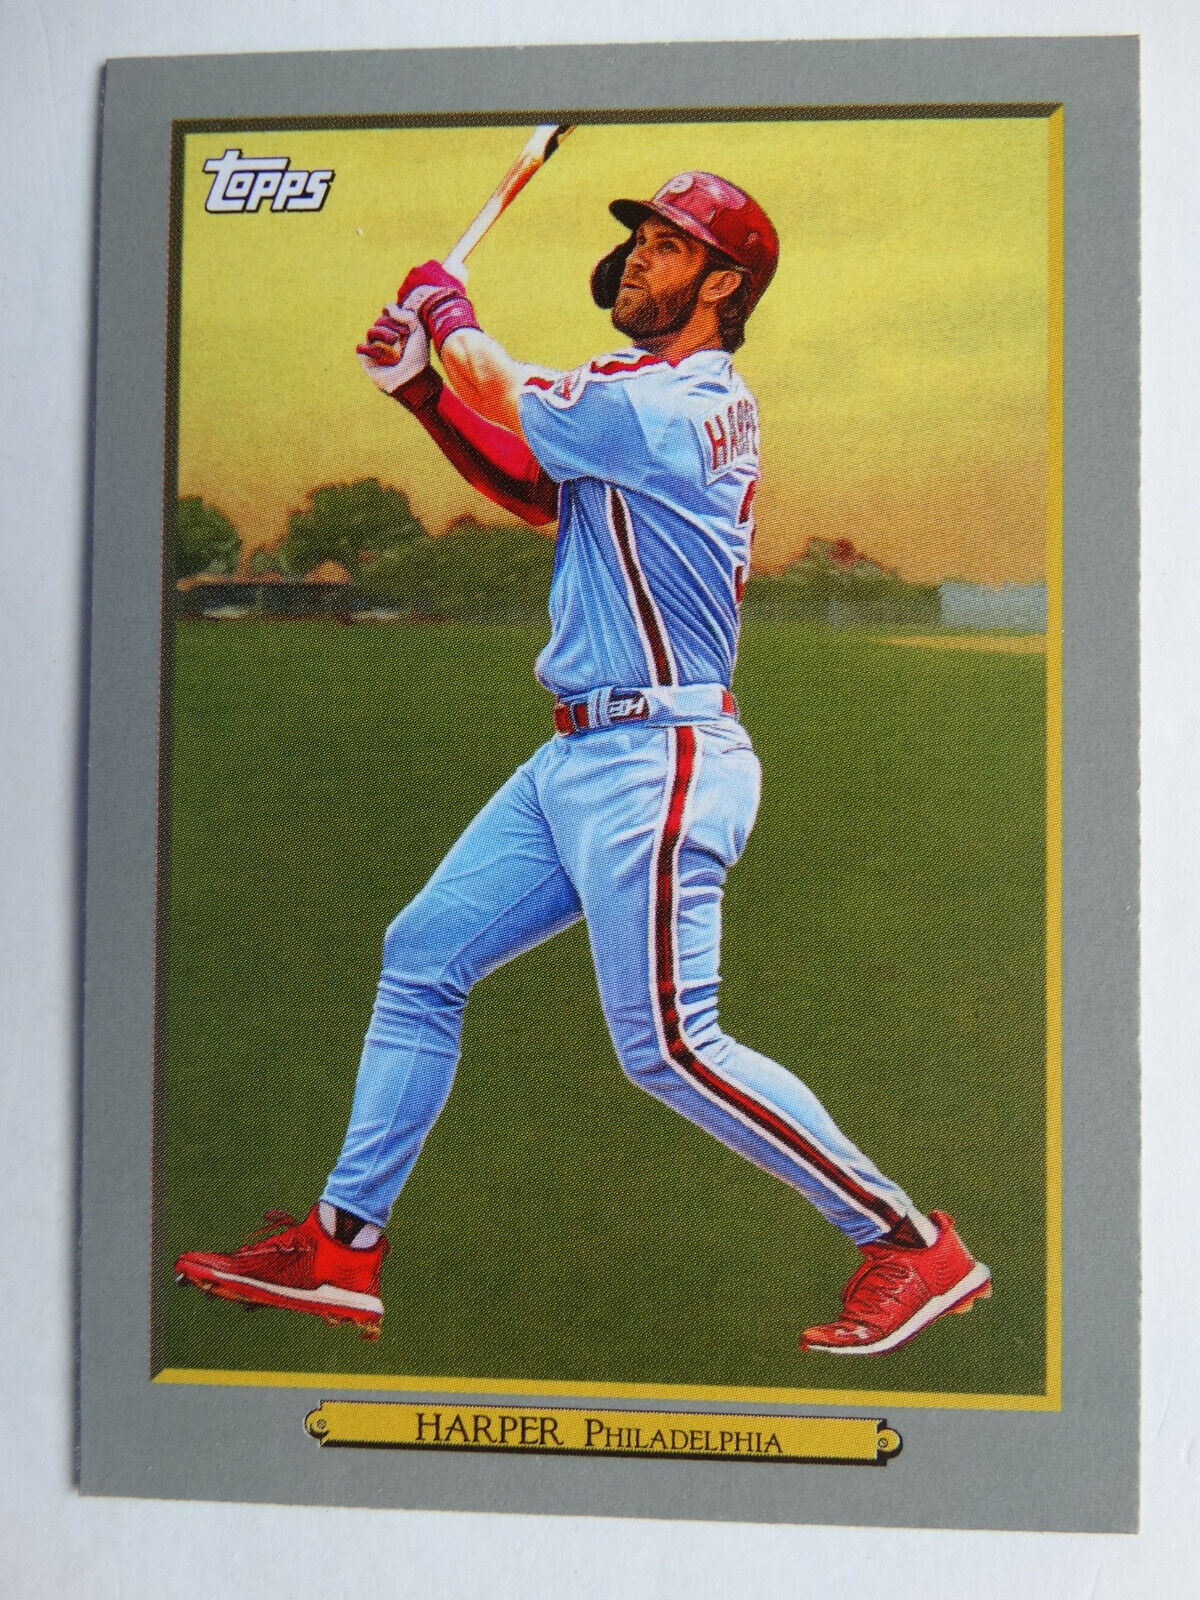 2020 Topps Series 1 Turkey Red Insert Complete Your Set You U Pick List 1-100